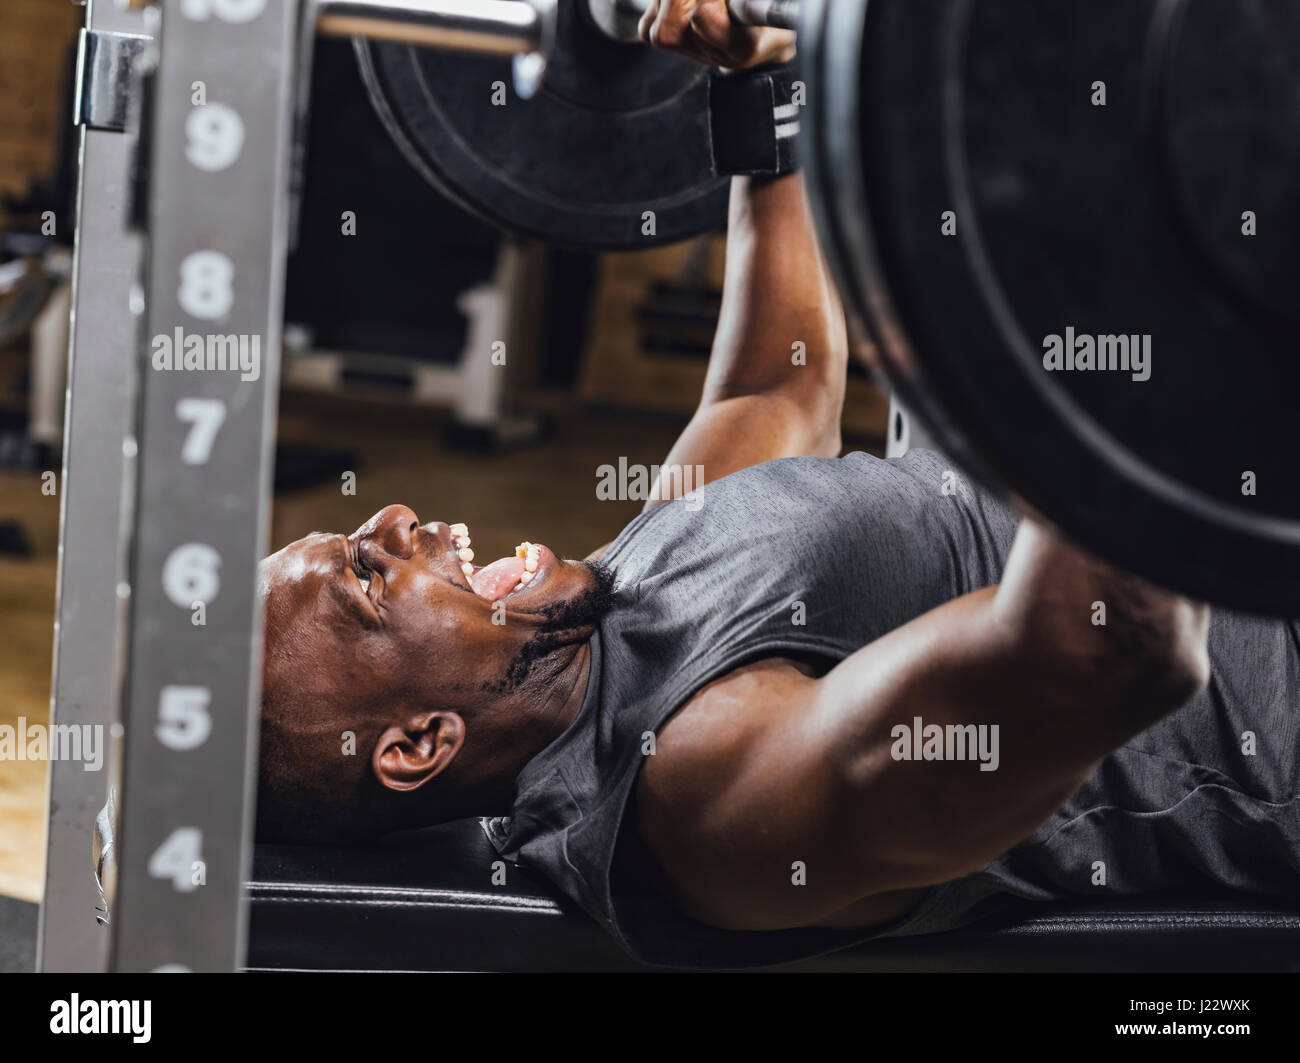 Athlete in gym doing weight lifting Stock Photo